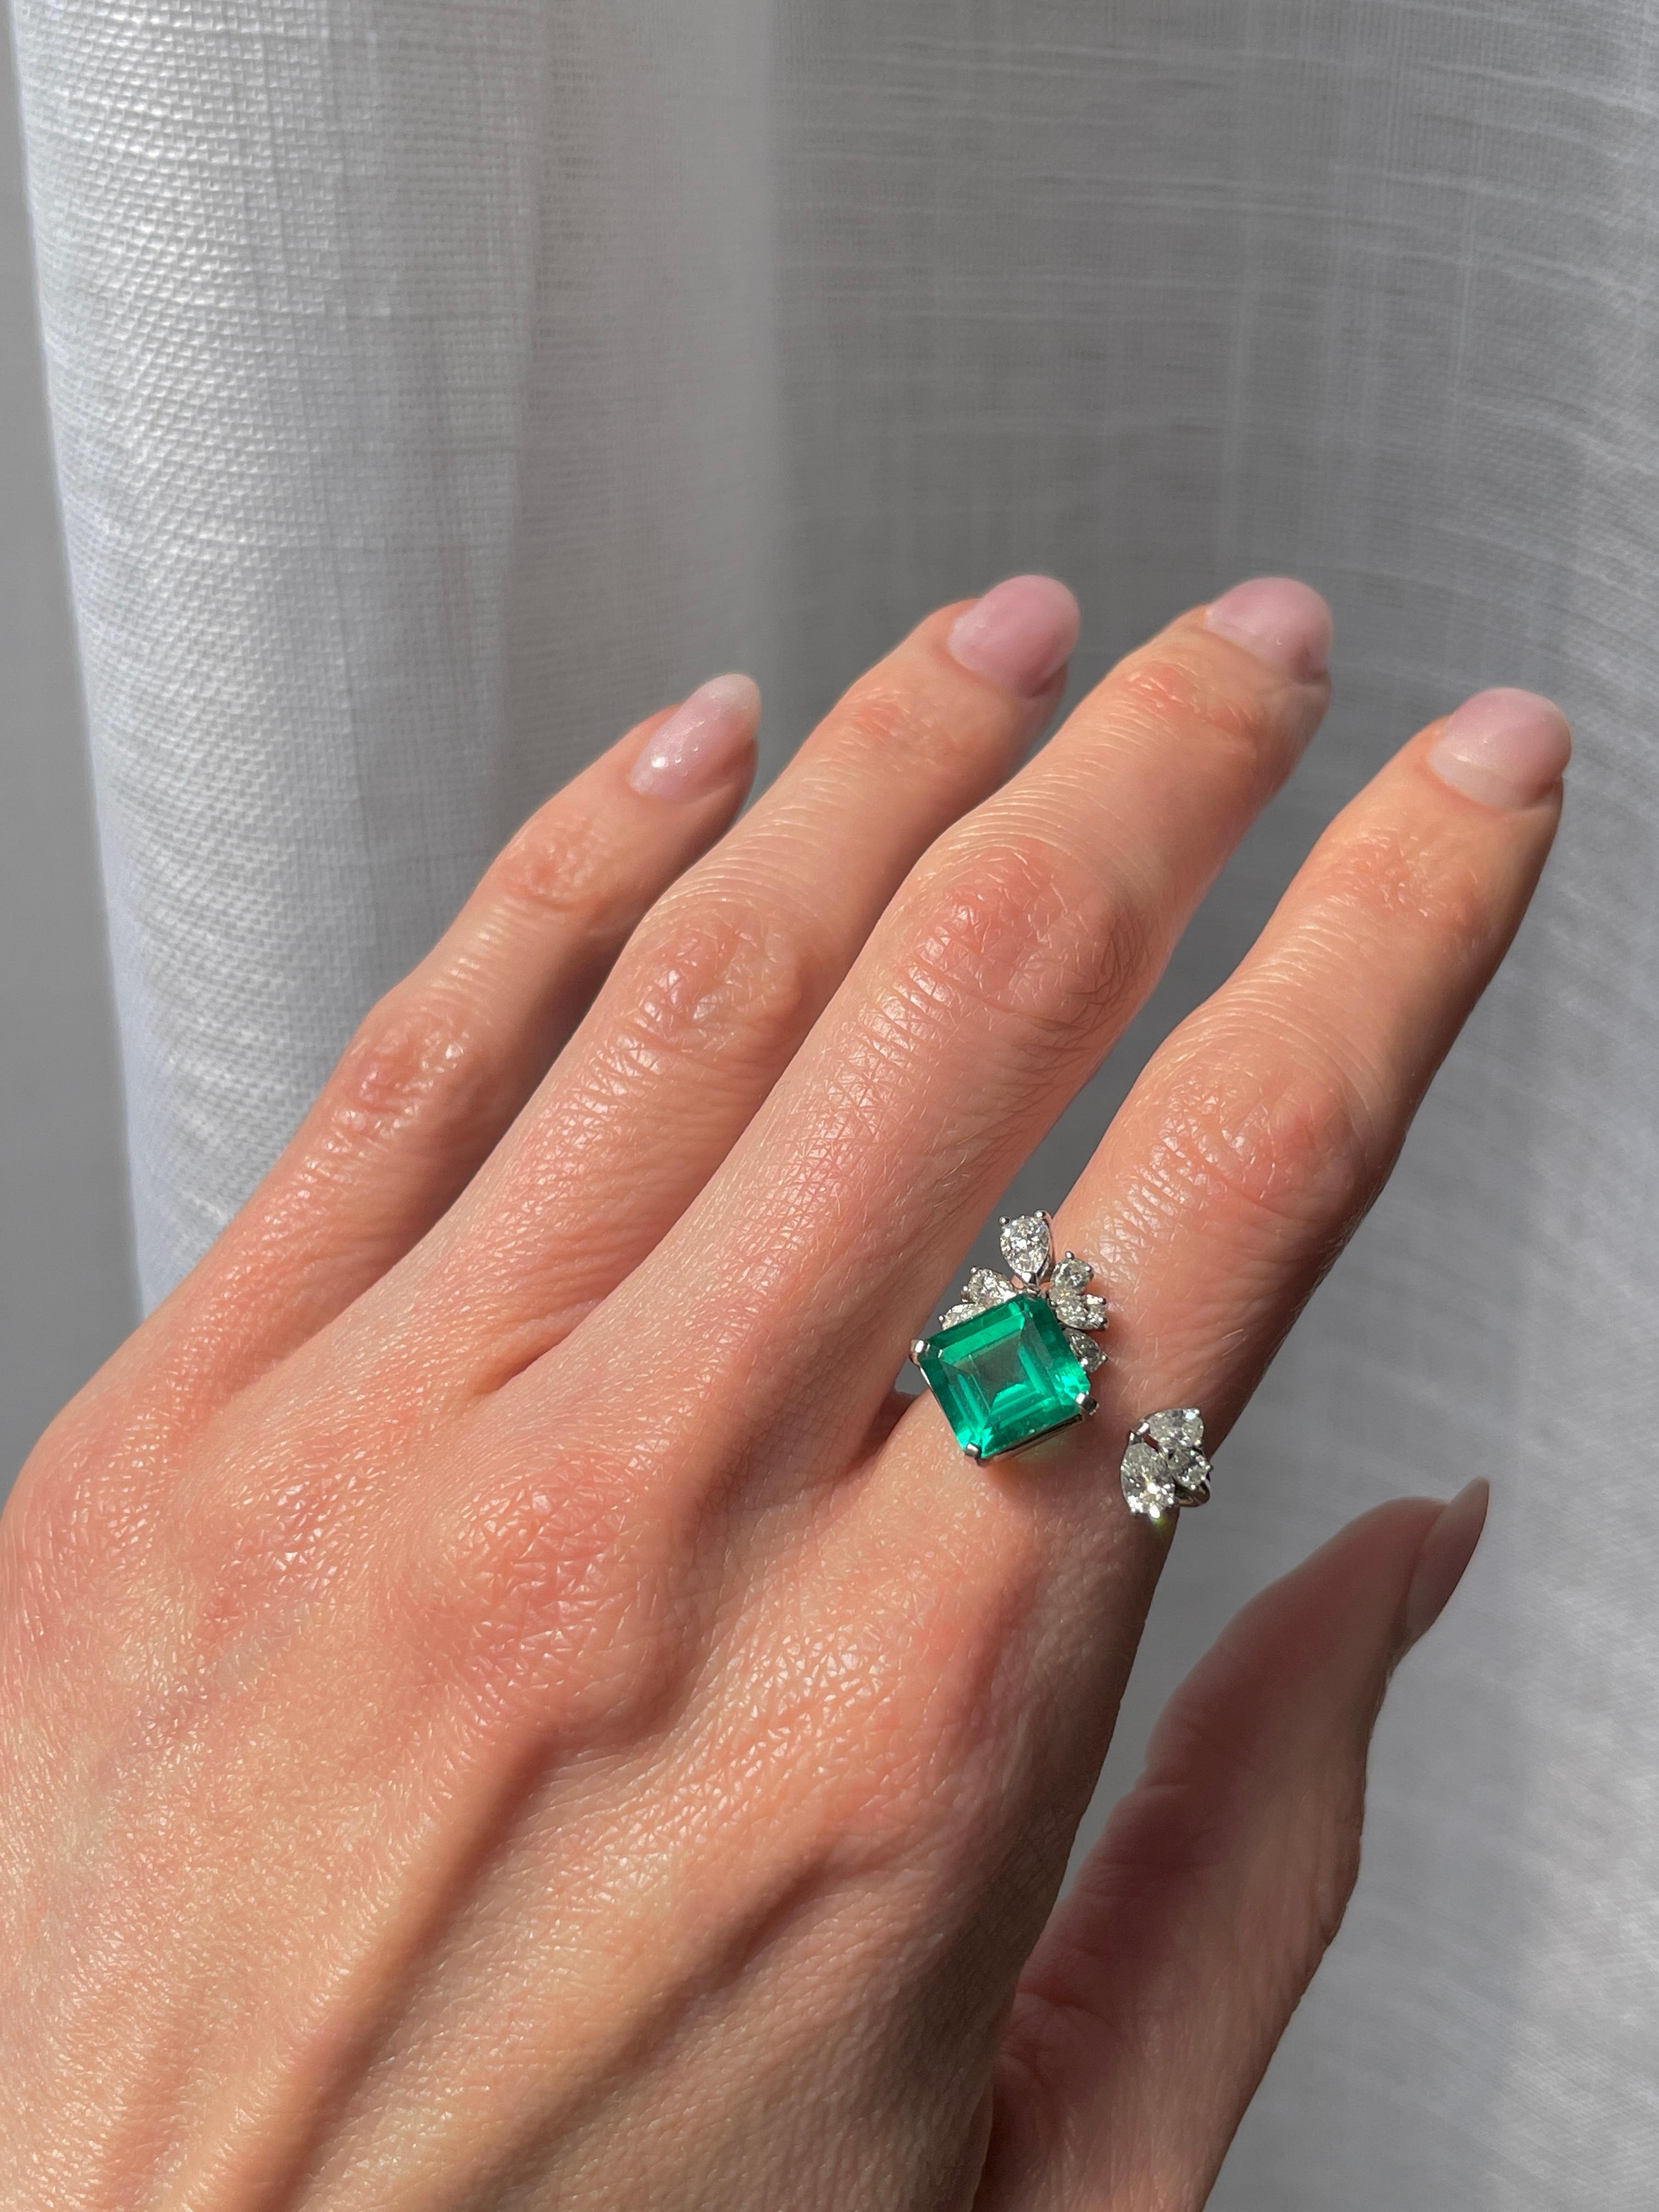 A unique and playful design to showcase a serious stone. This 4.27 carat Zambian emerald is low oil certified by AGL, eye clean, and a particularly vibrant green color.

The surrounding clusters are made of GH VS+ natural diamonds, totaling 0.90